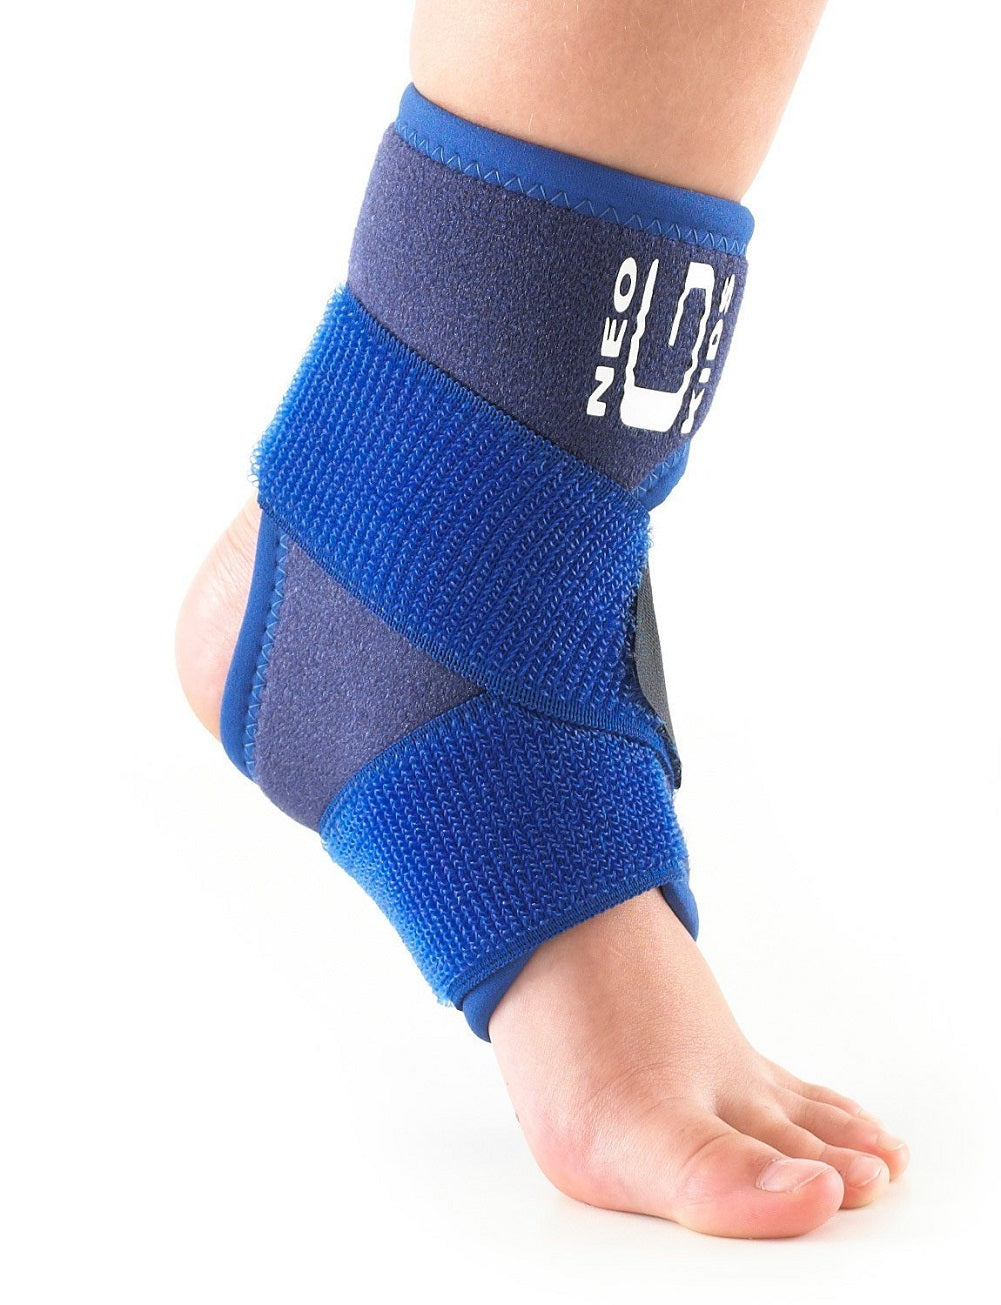 Neo G Kids! Ankle Support with Figure of 8 Straps, Universal Size, Blue